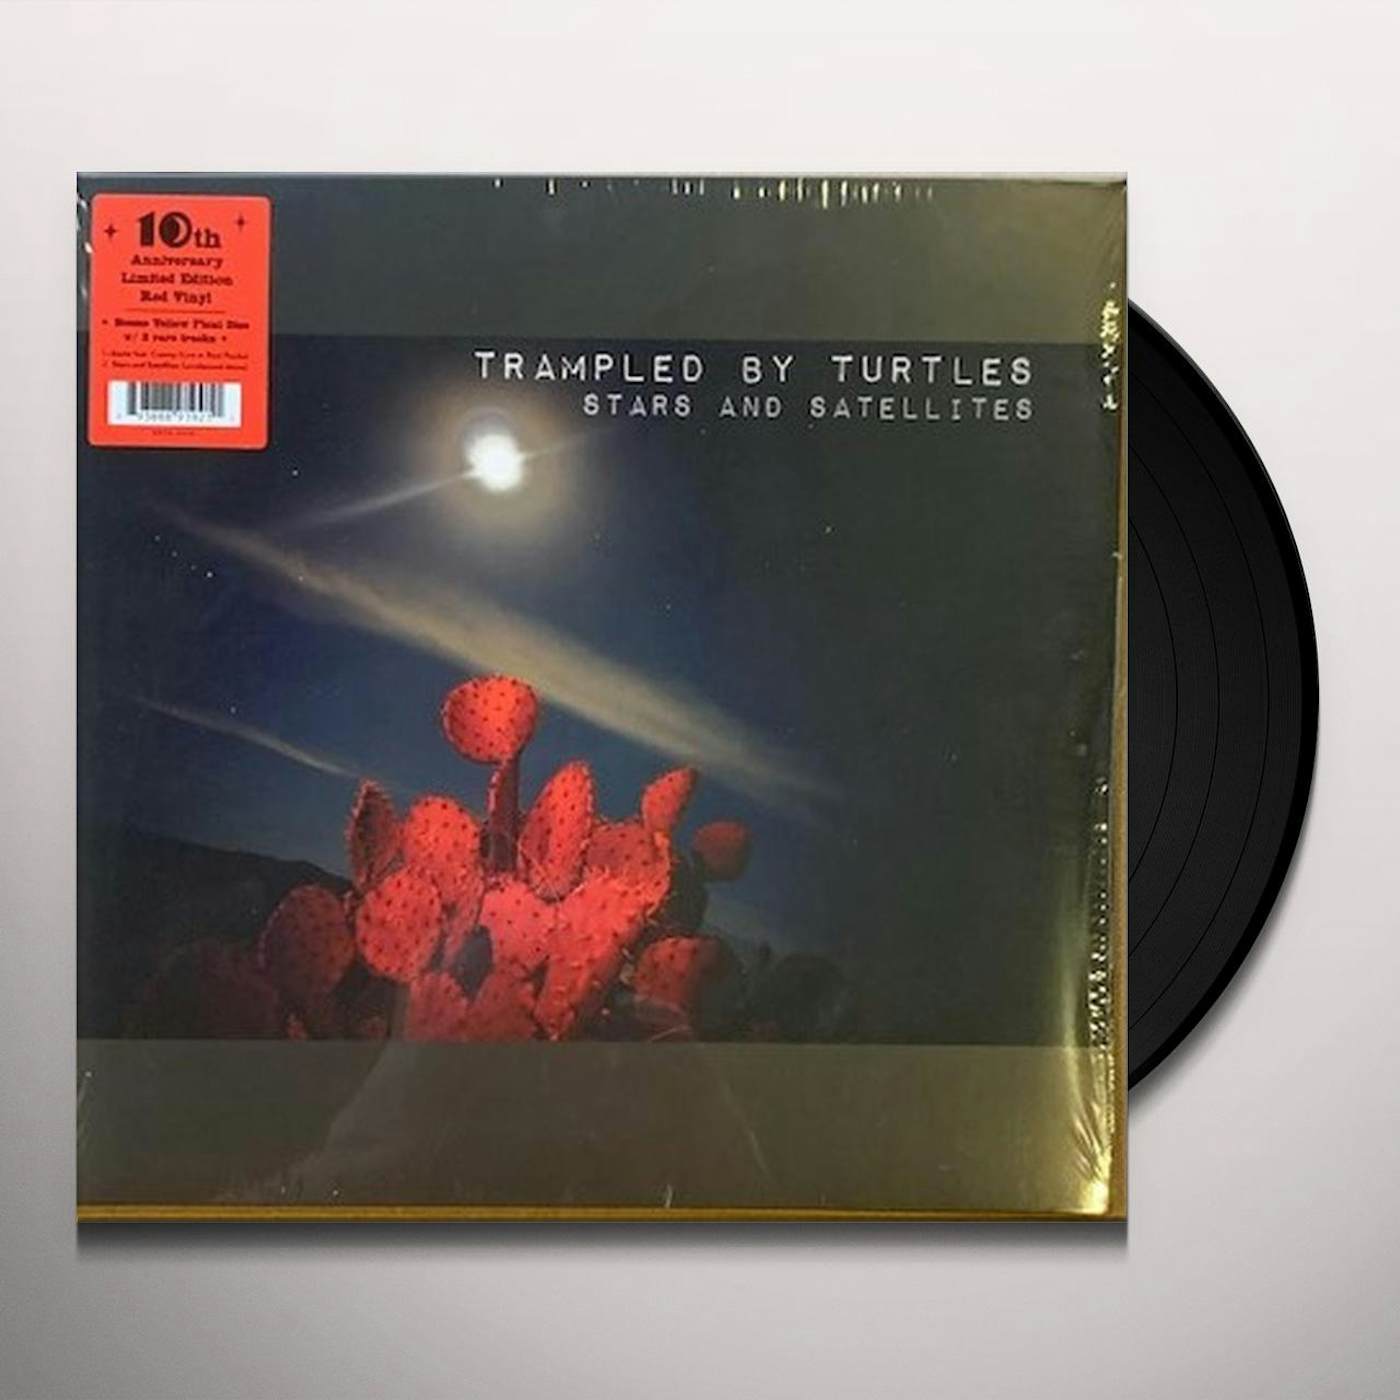 Trampled by Turtles STARS & SATELLITES (10 YEAR ANNIVERSARY/OPAQUE RED VINYL) Vinyl Record